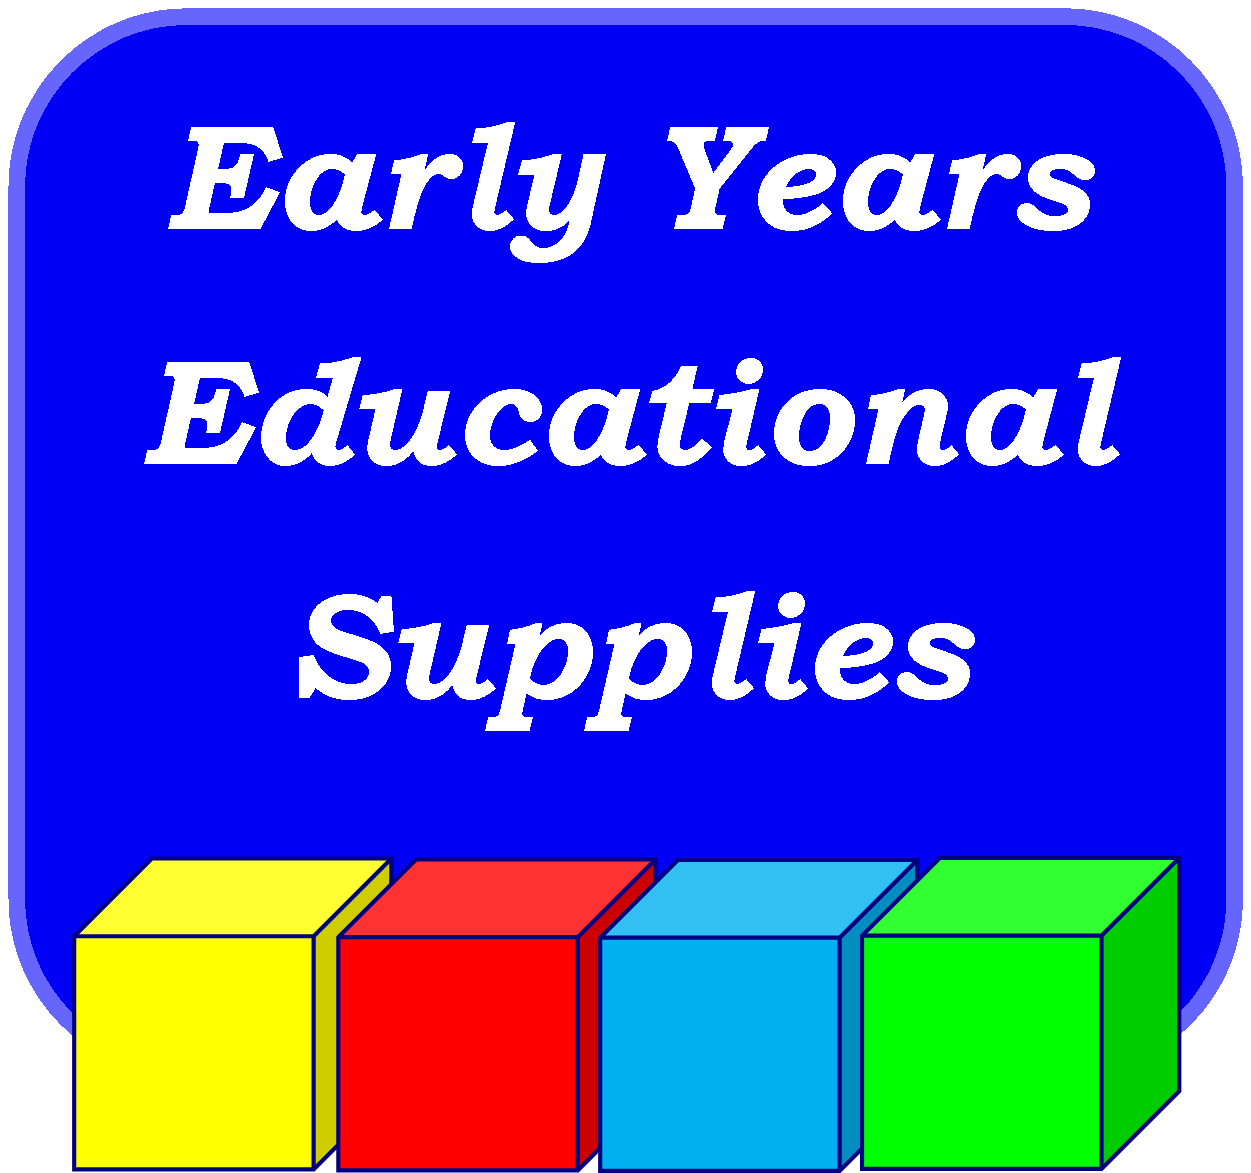 Early Years Educational Supplies